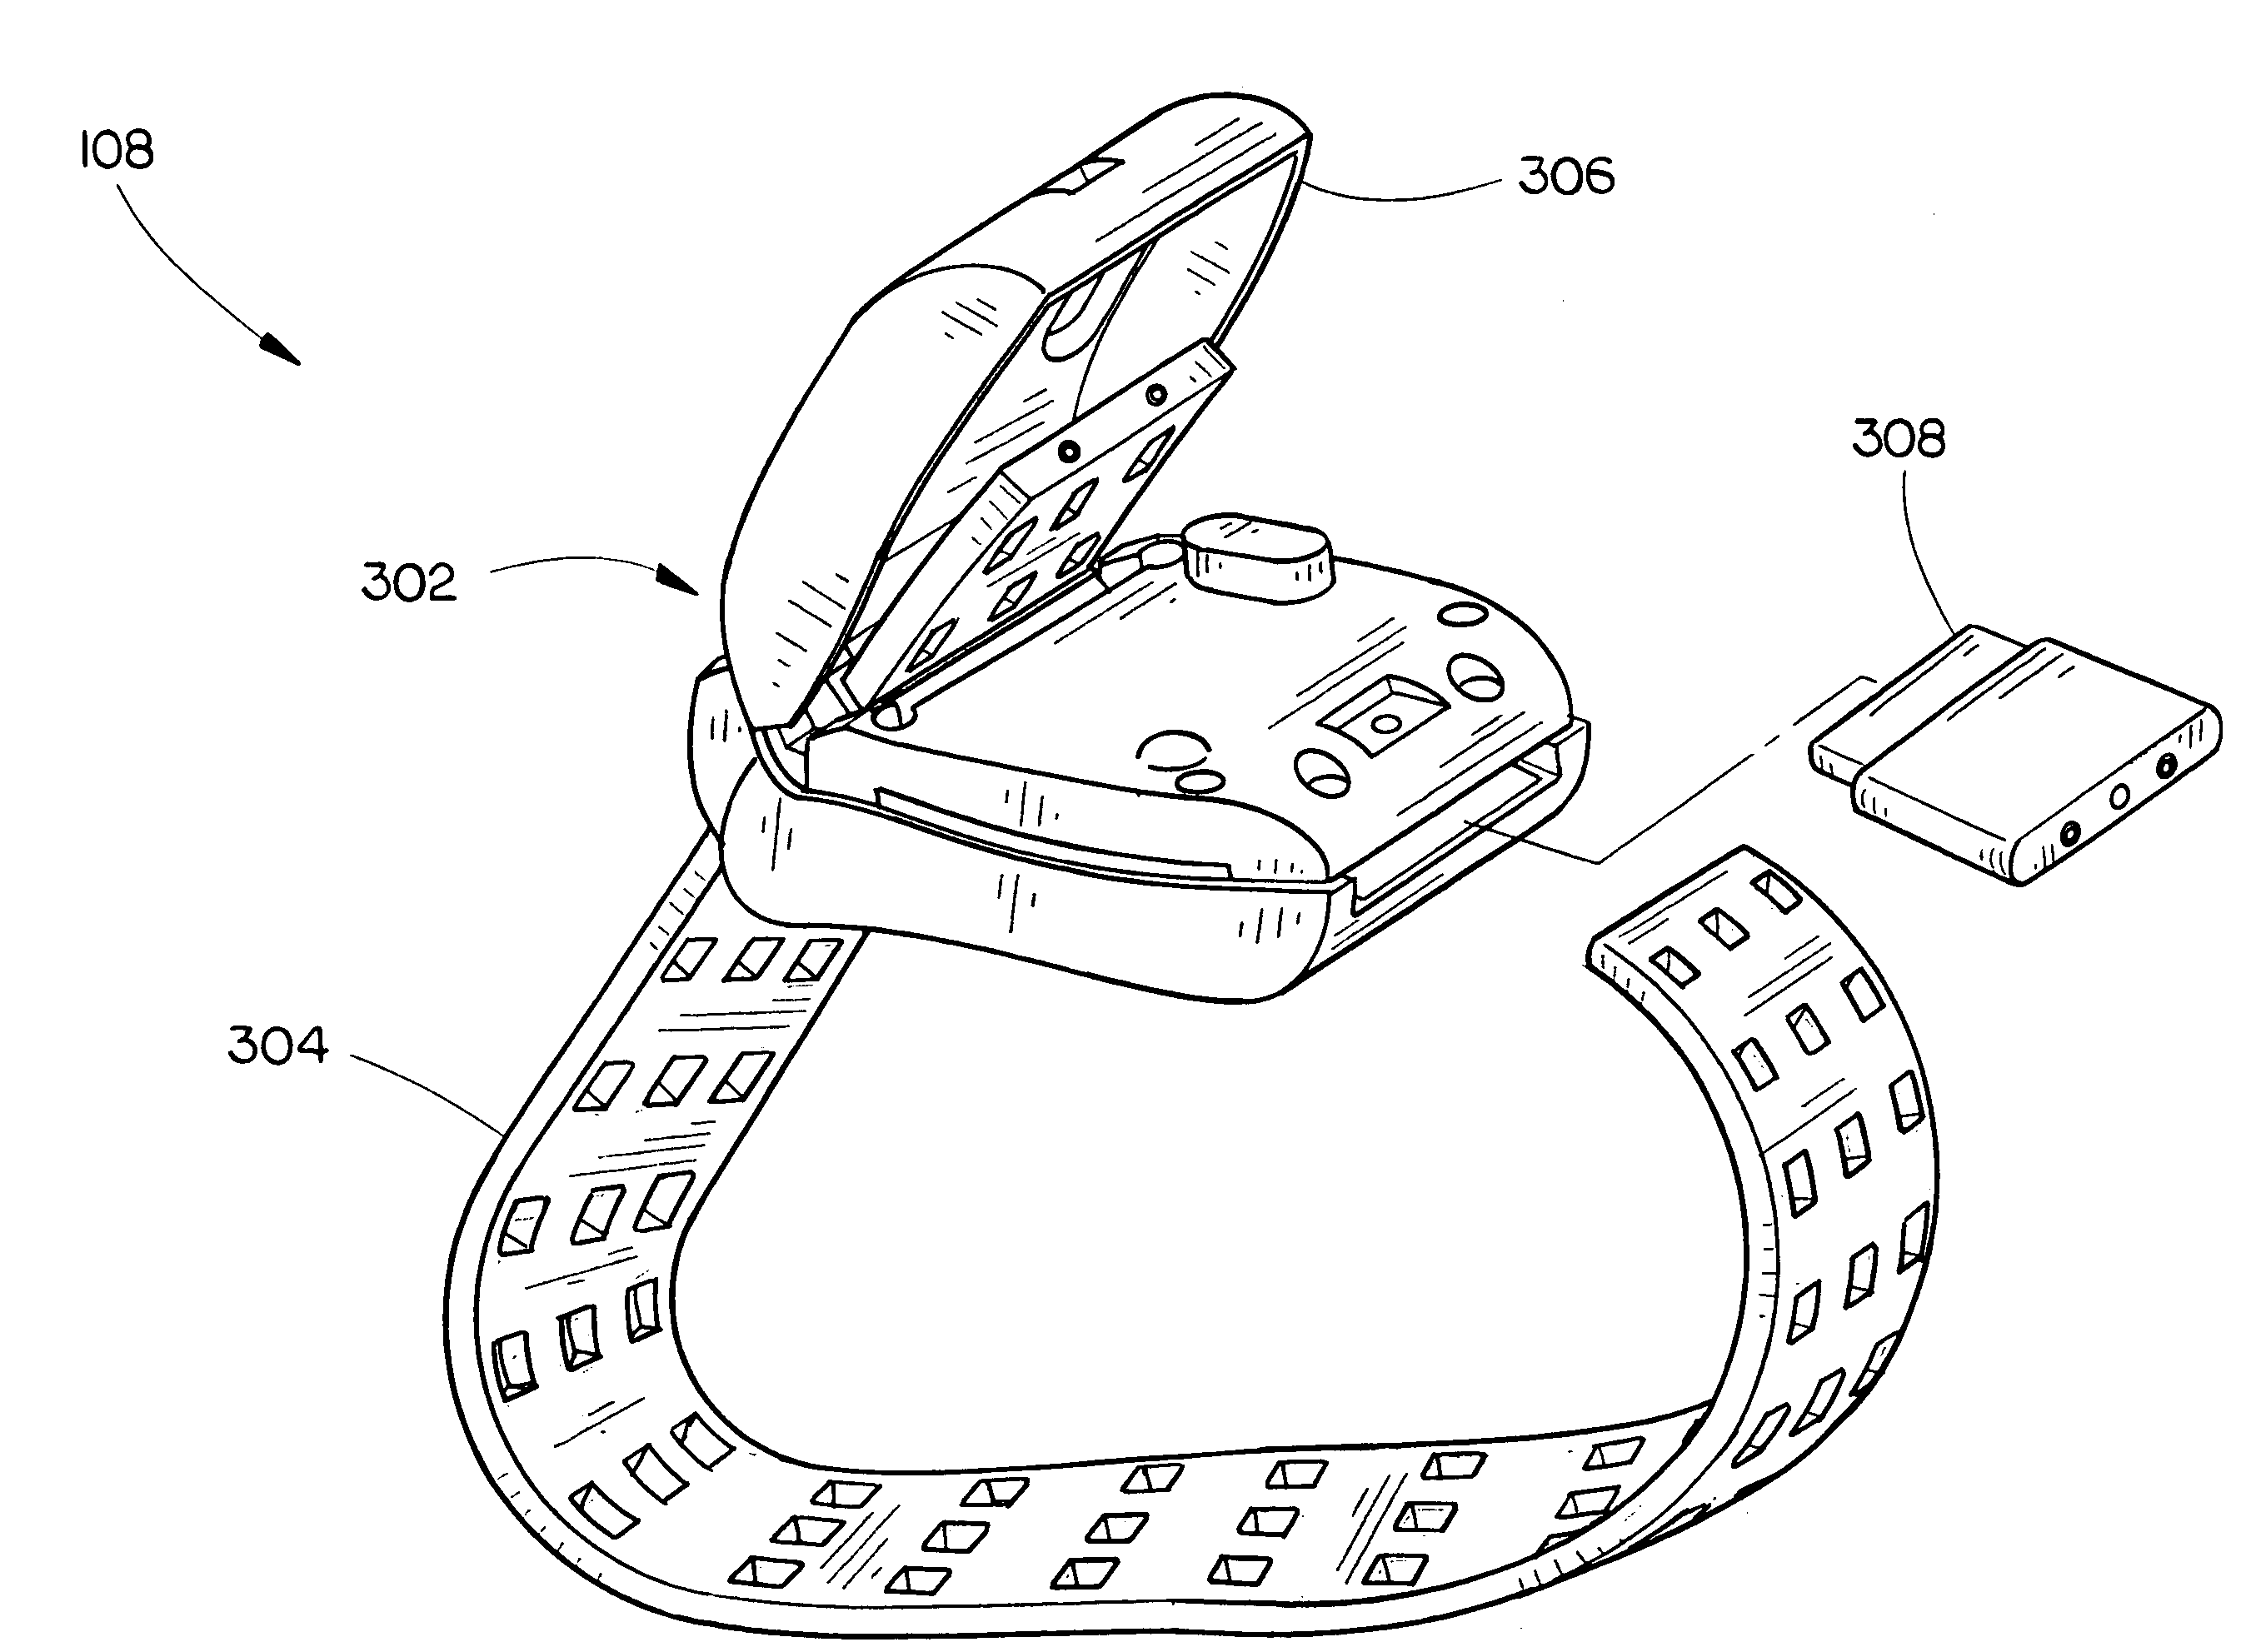 Apparatus for monitoring a mobile object including a partitionable strap